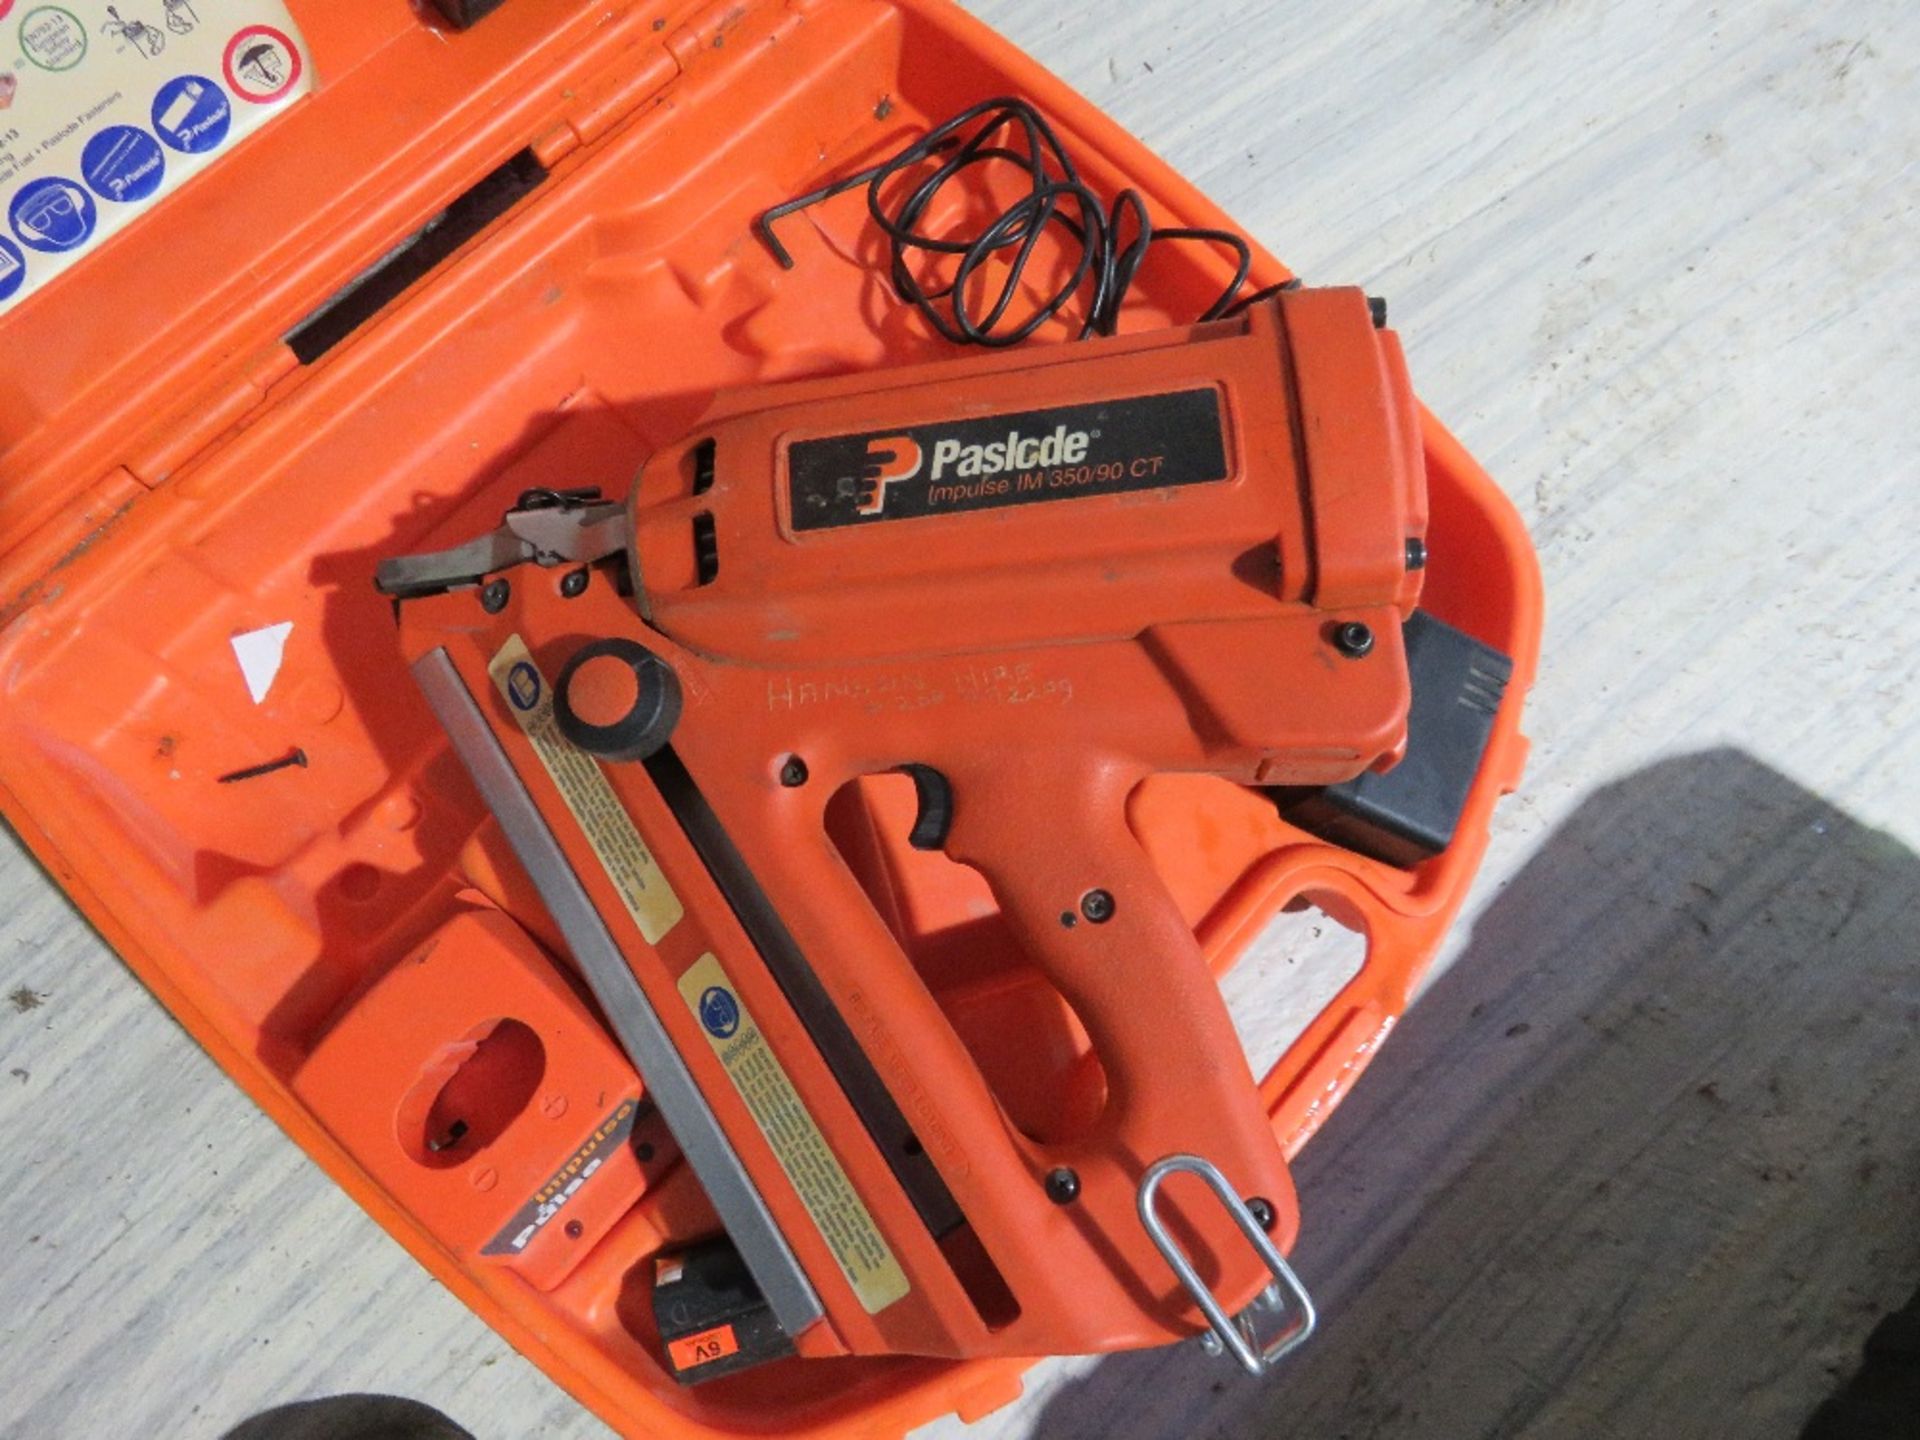 PASLODE FIRST FIX NAIL GUN IN A CASE. SOURCED FROM LOCAL DEPOT CLOSURE. - Image 2 of 3